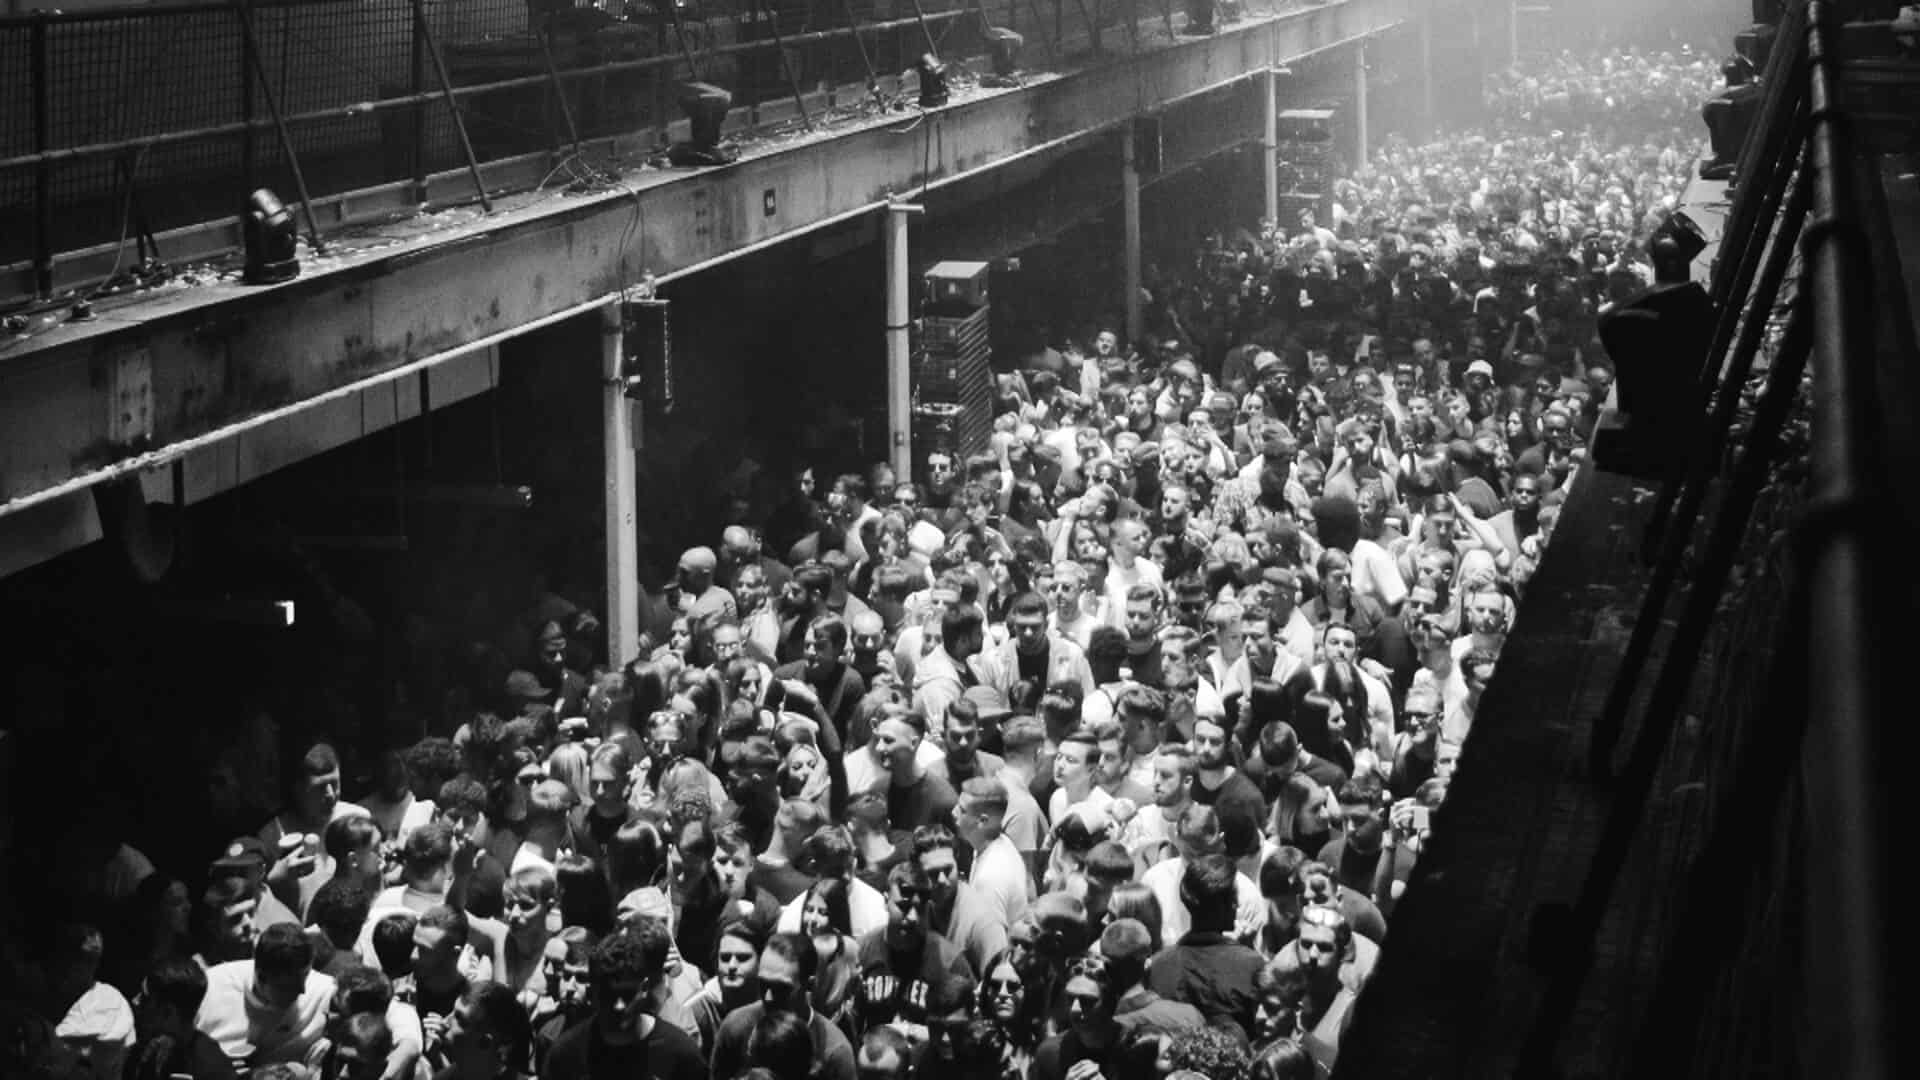 Printworks London may reopen by 2026